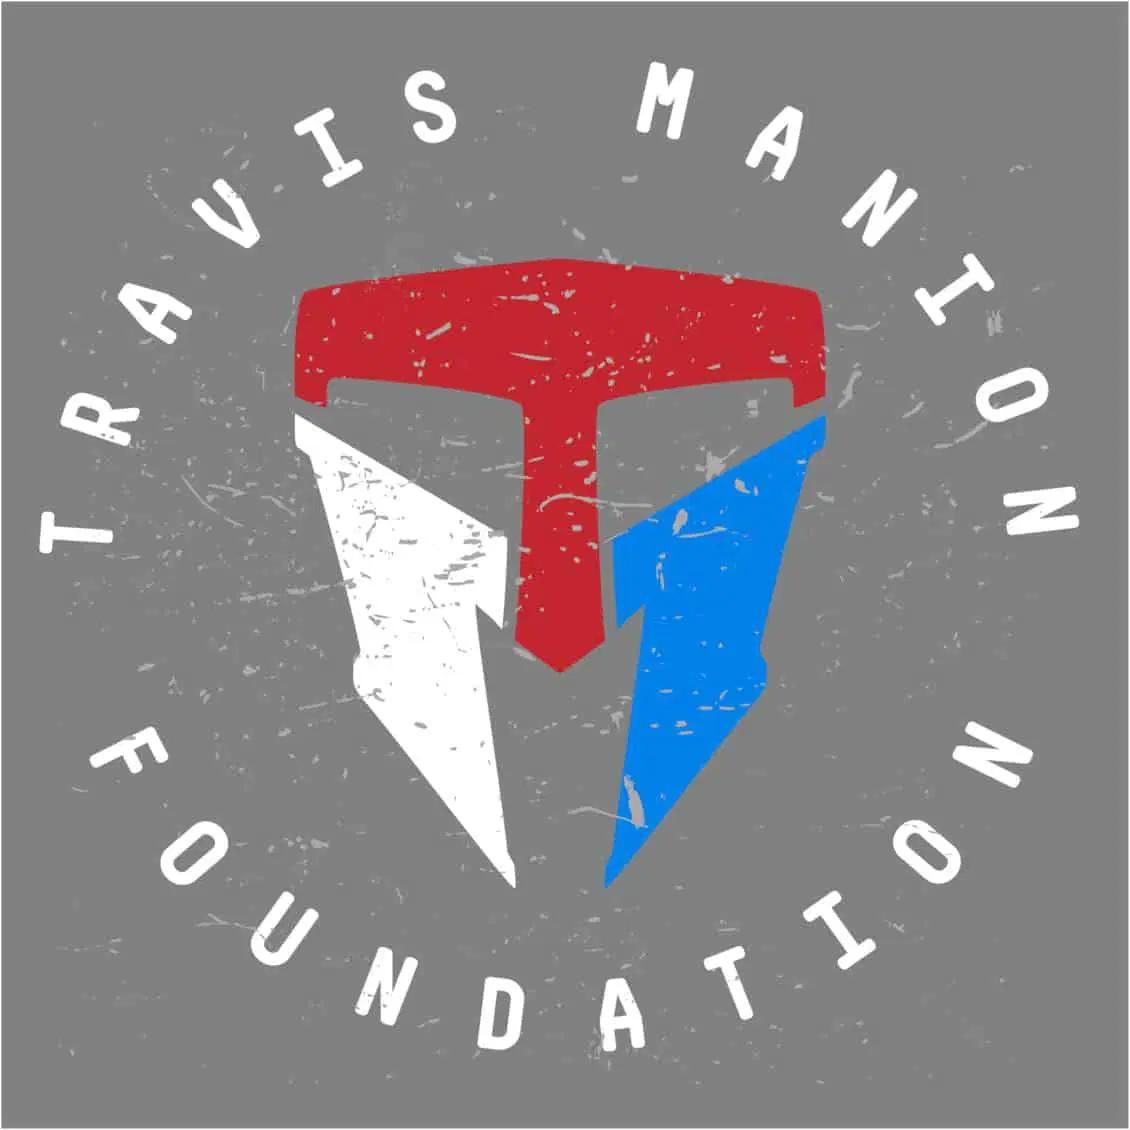 We are proud to be a part of something greater. Come see us at the 9/11 Heroes Run this September 8th. x.com/tmfoundation?s… - - - - - #travismanionfoundation #LALOtactical #LALOshoes #LALOboots #heroes #run